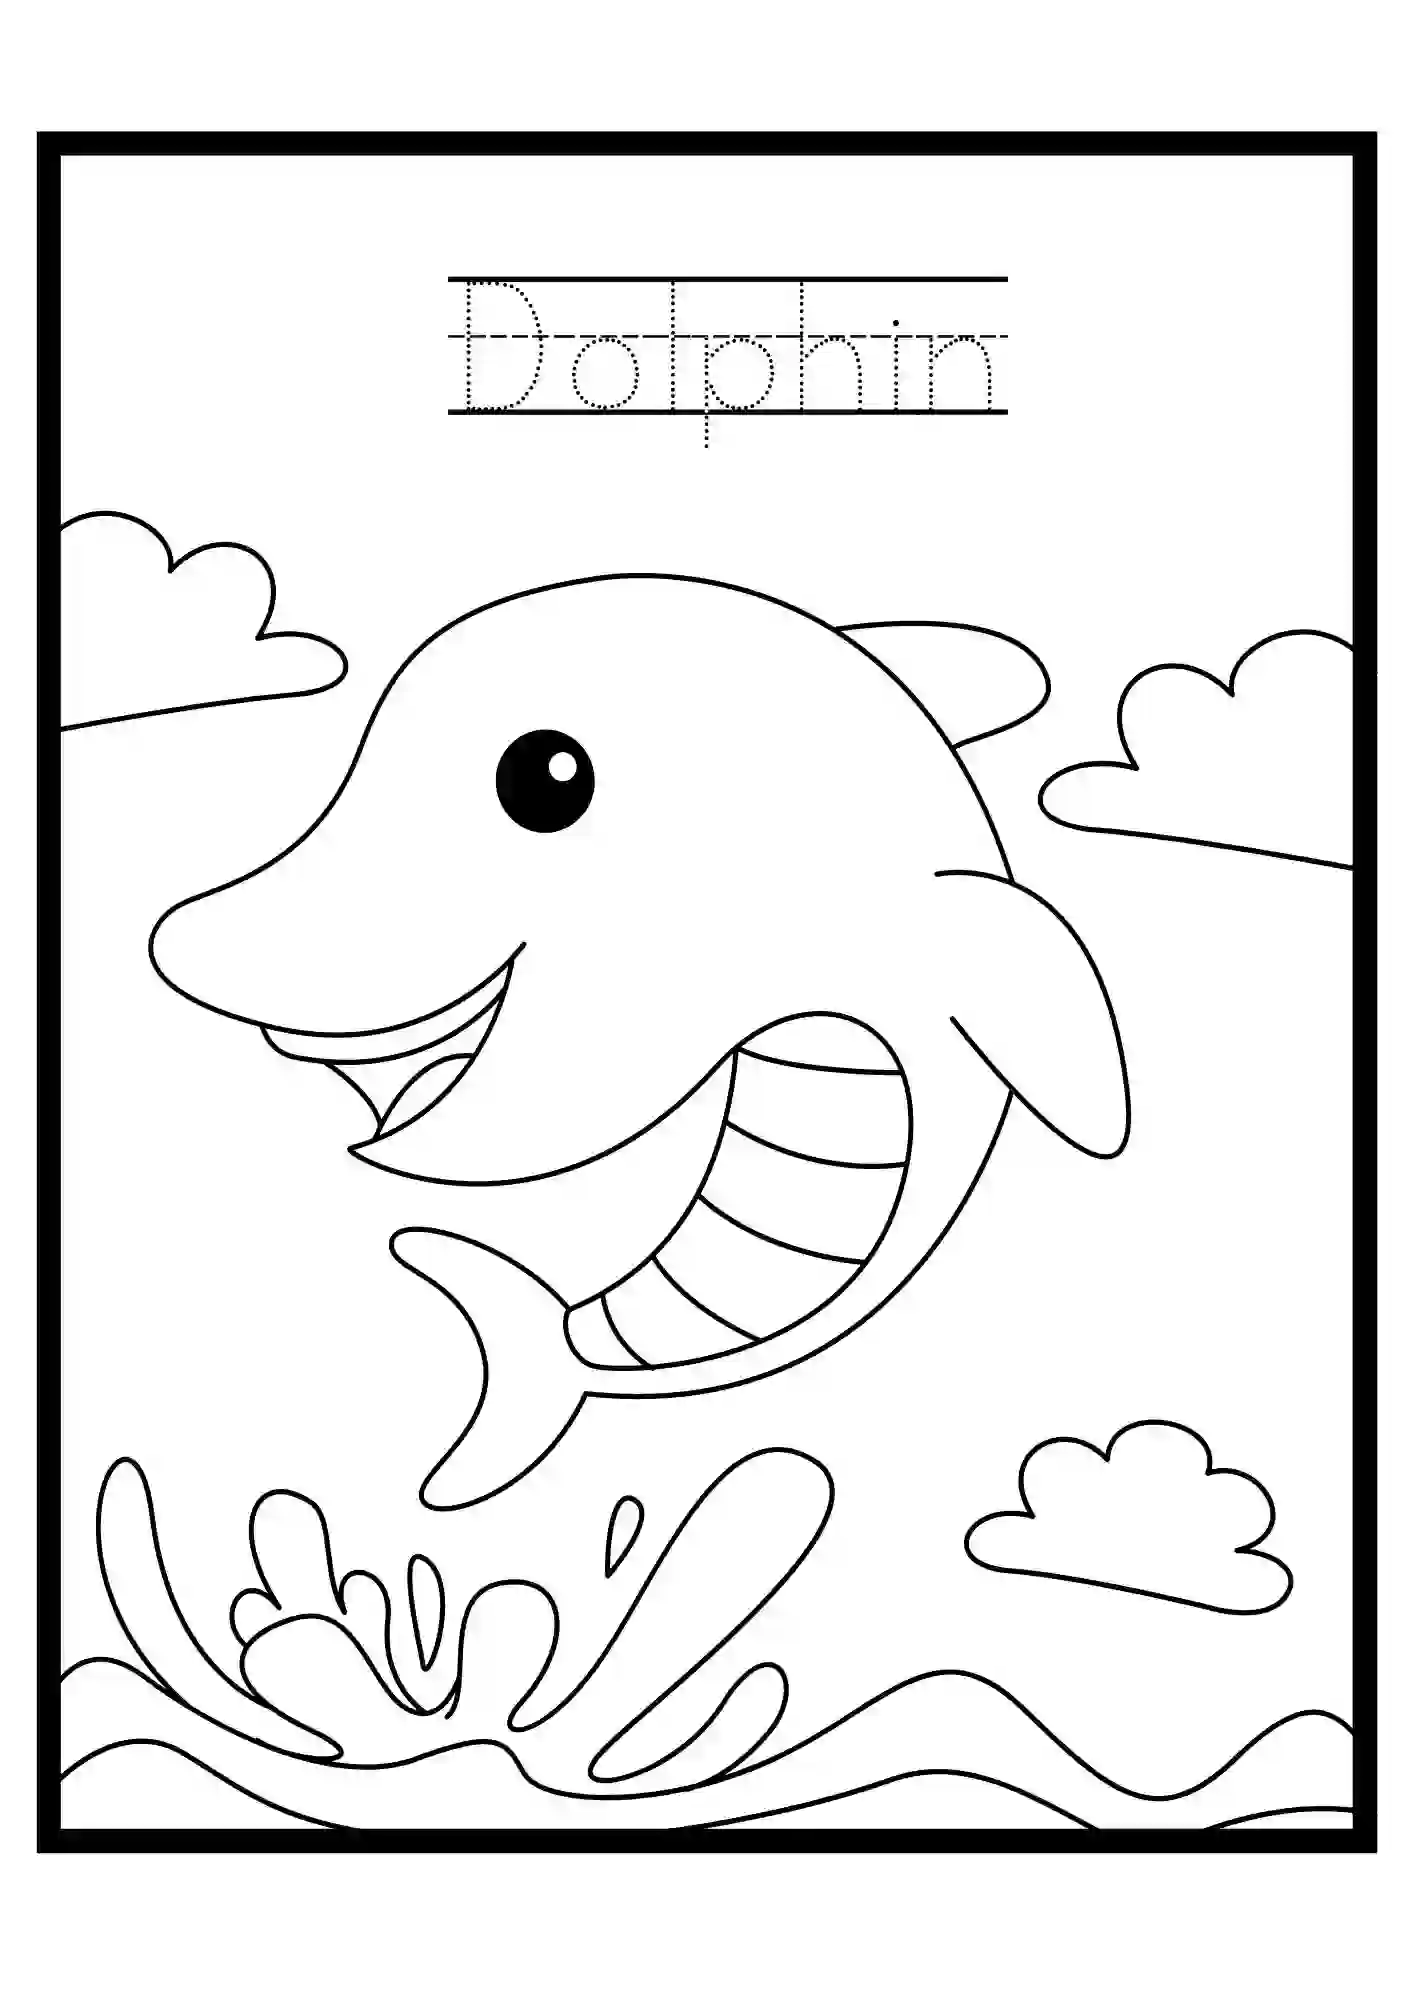 Under the Water Colouring Worksheets dolphin